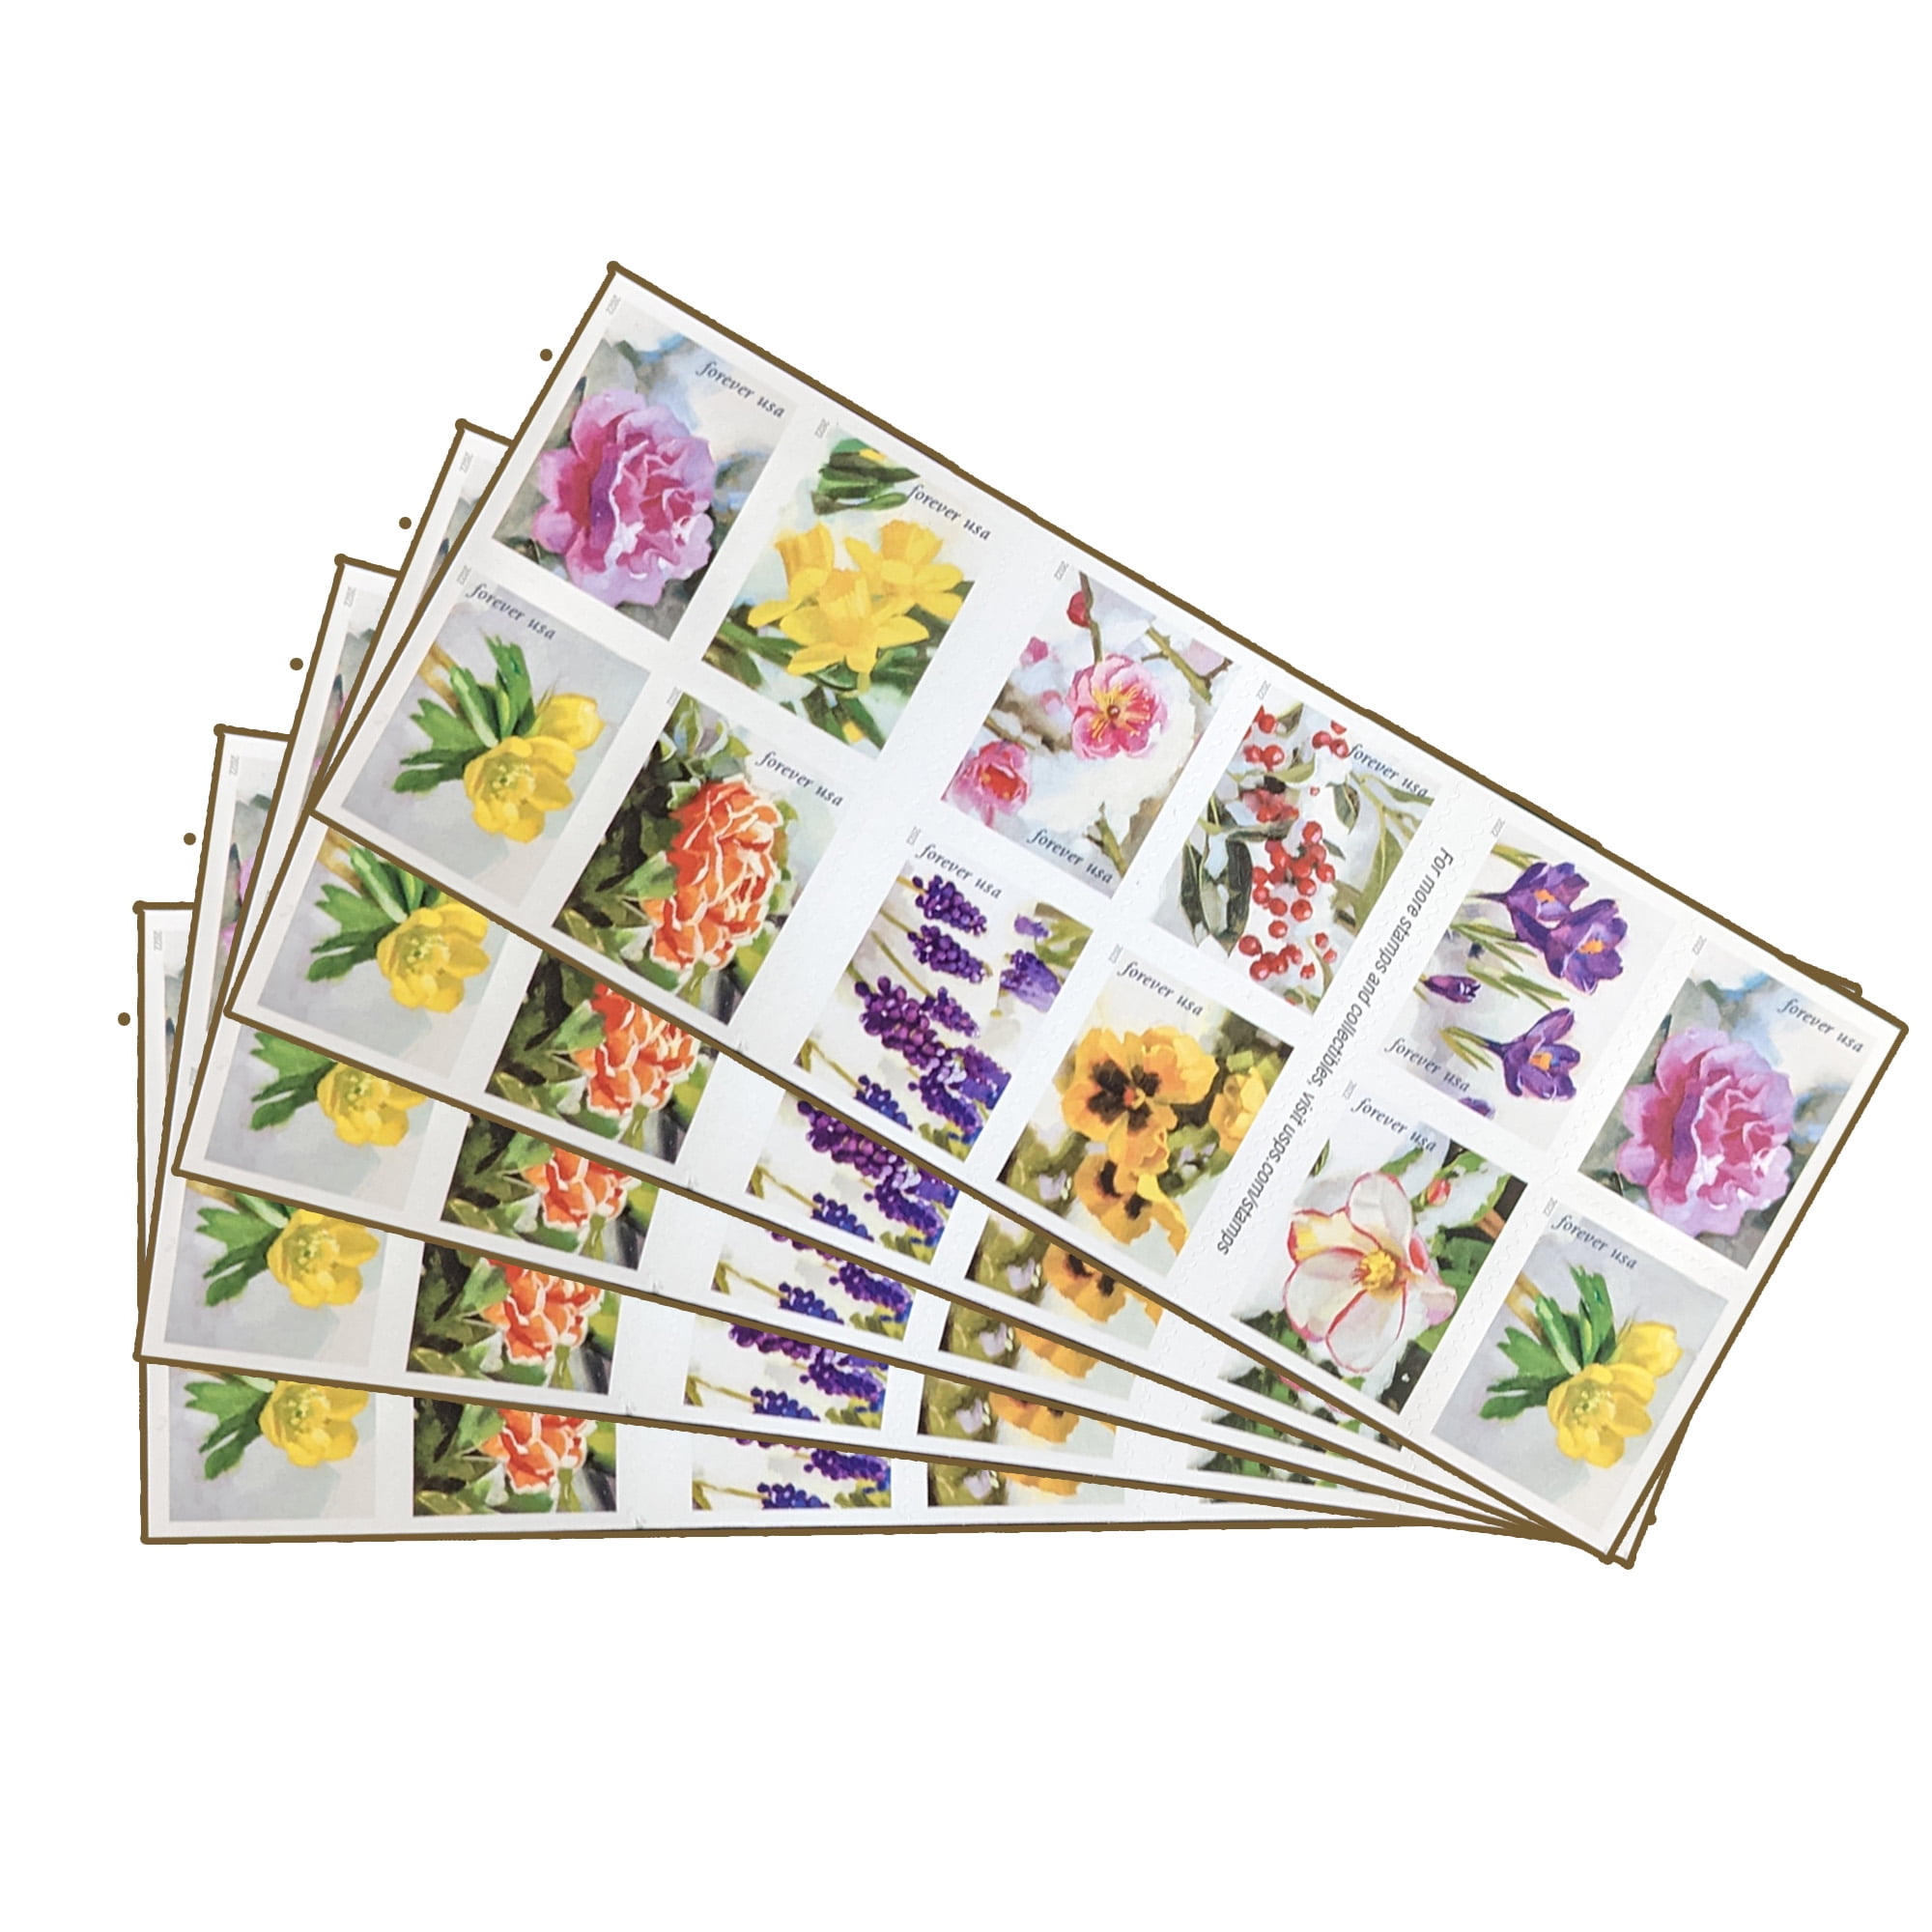 U S P S BOOK OF POSTAGE STAMPS - 20 PK, Household